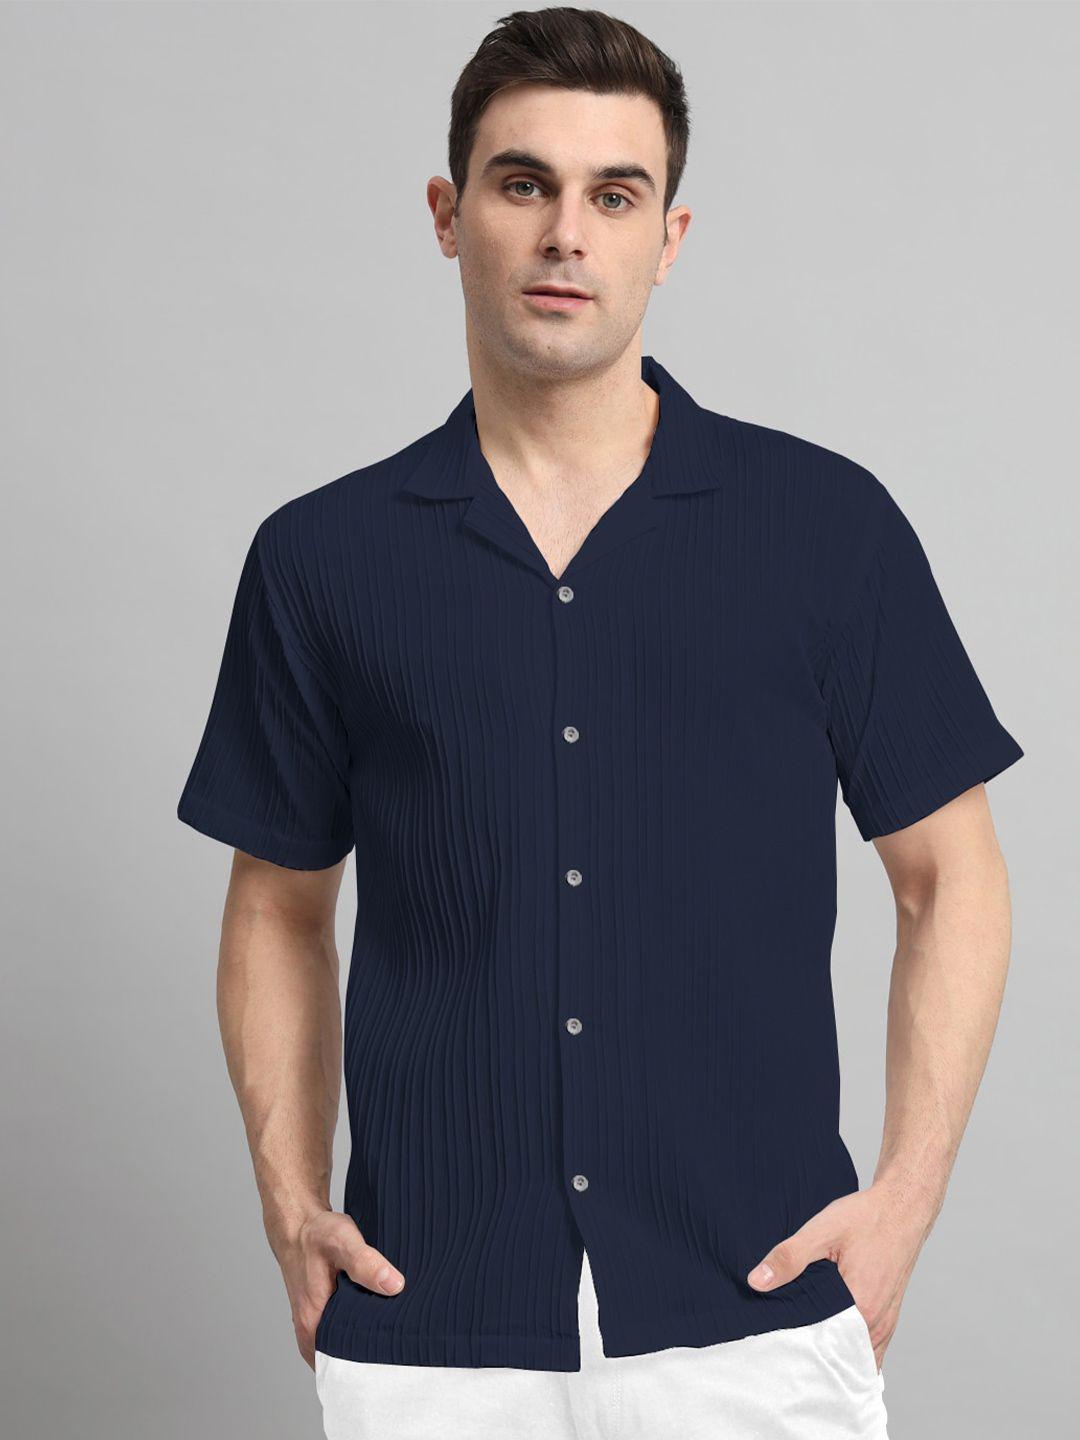 wuxi-classic-striped-spread-collar-short-sleeves-casual-shirt